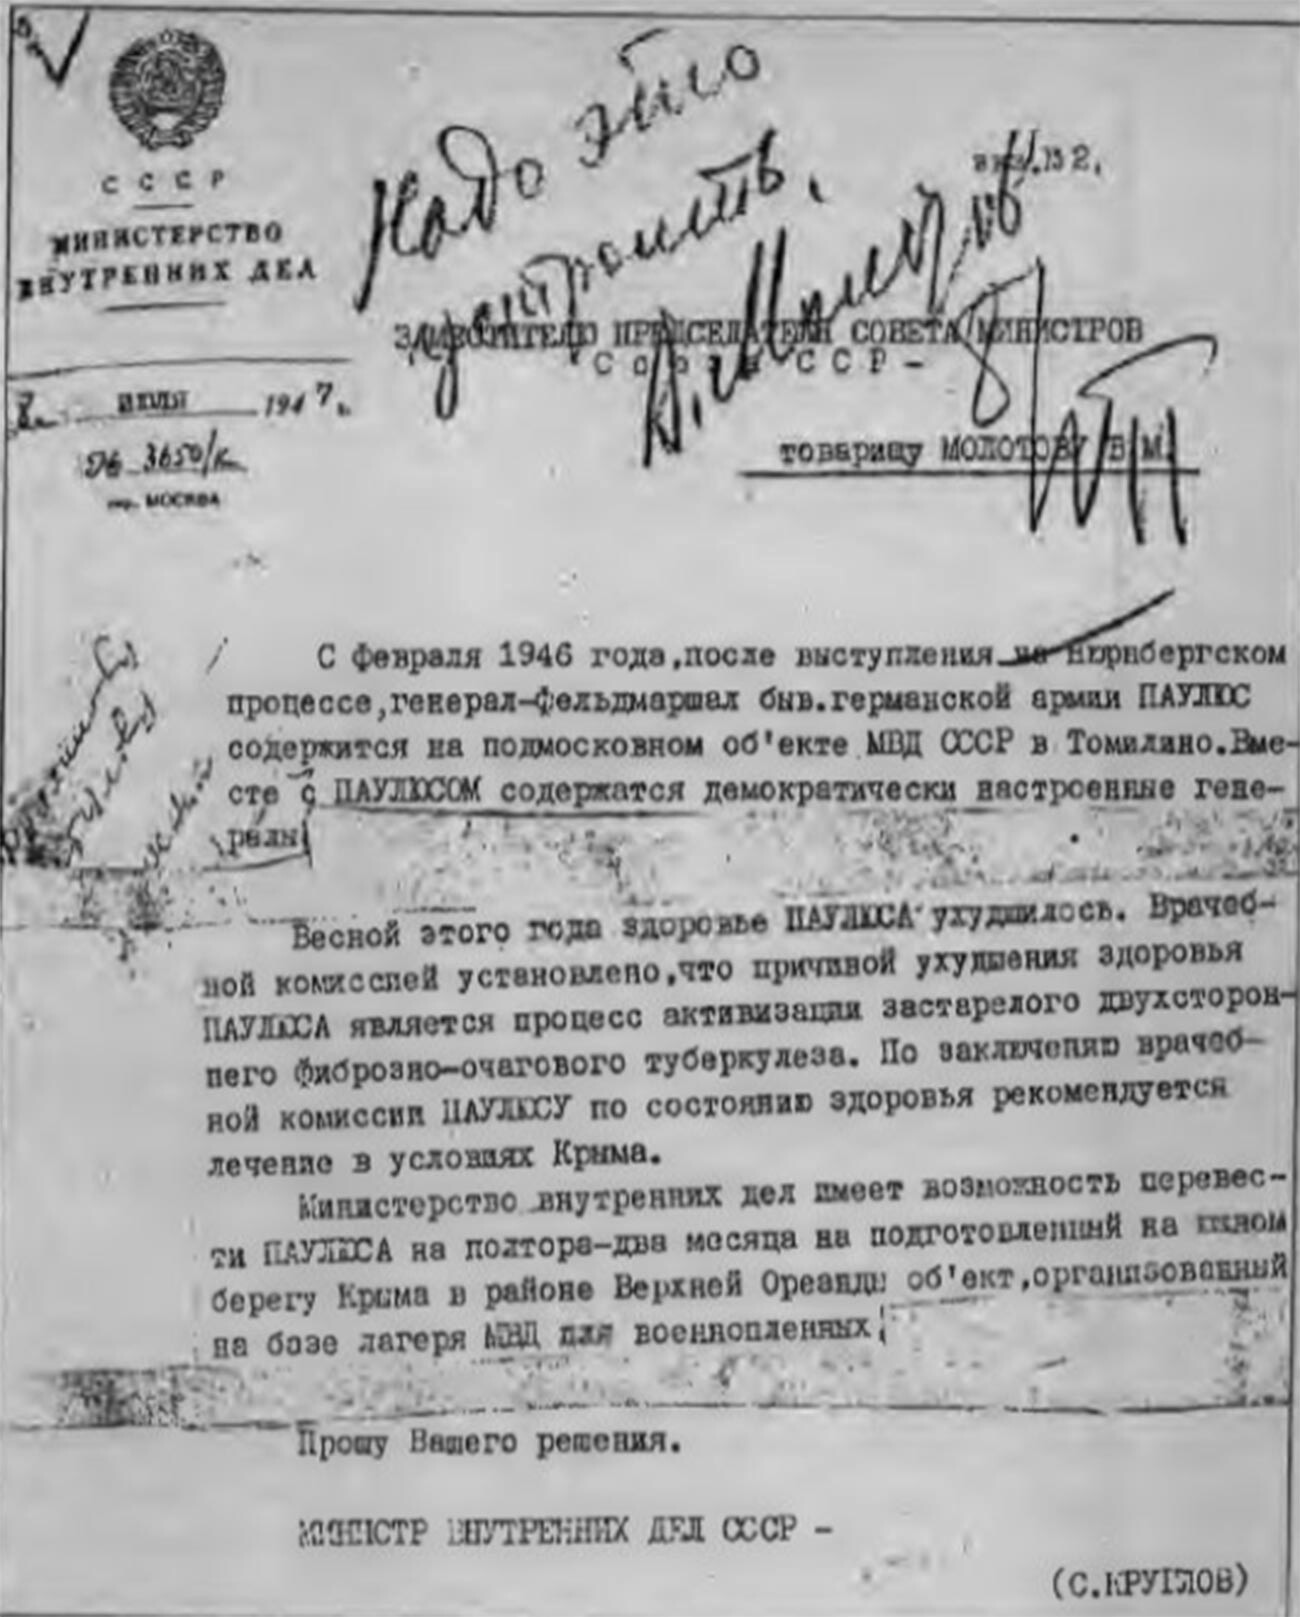 The Minister of Internal Affairs, Kruglov's note on Paulus' health and Molotov's handwritten commentary, “We should arrange it.”